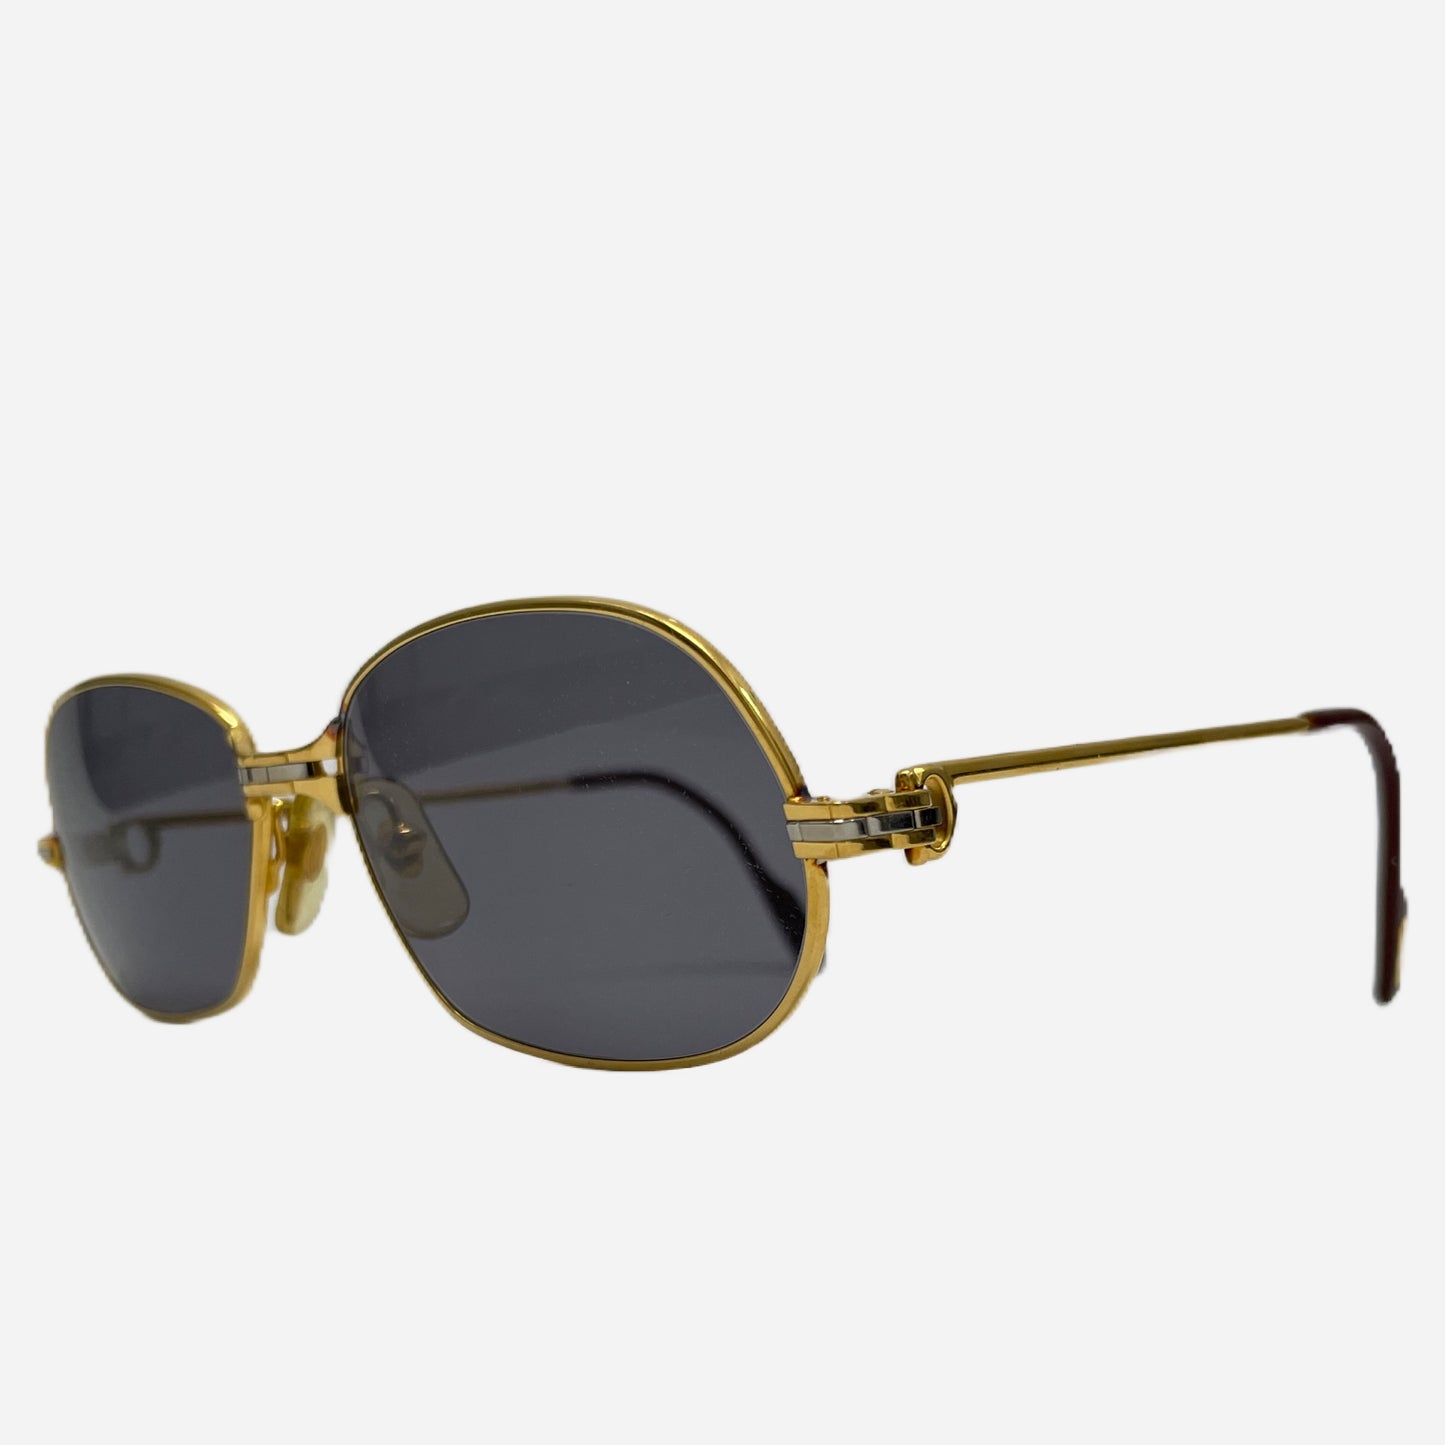 Vintage-Cartier-Panthere-Sonnenbrille-Sunglasses-22CT-Gold-Plated-the-seekers-front